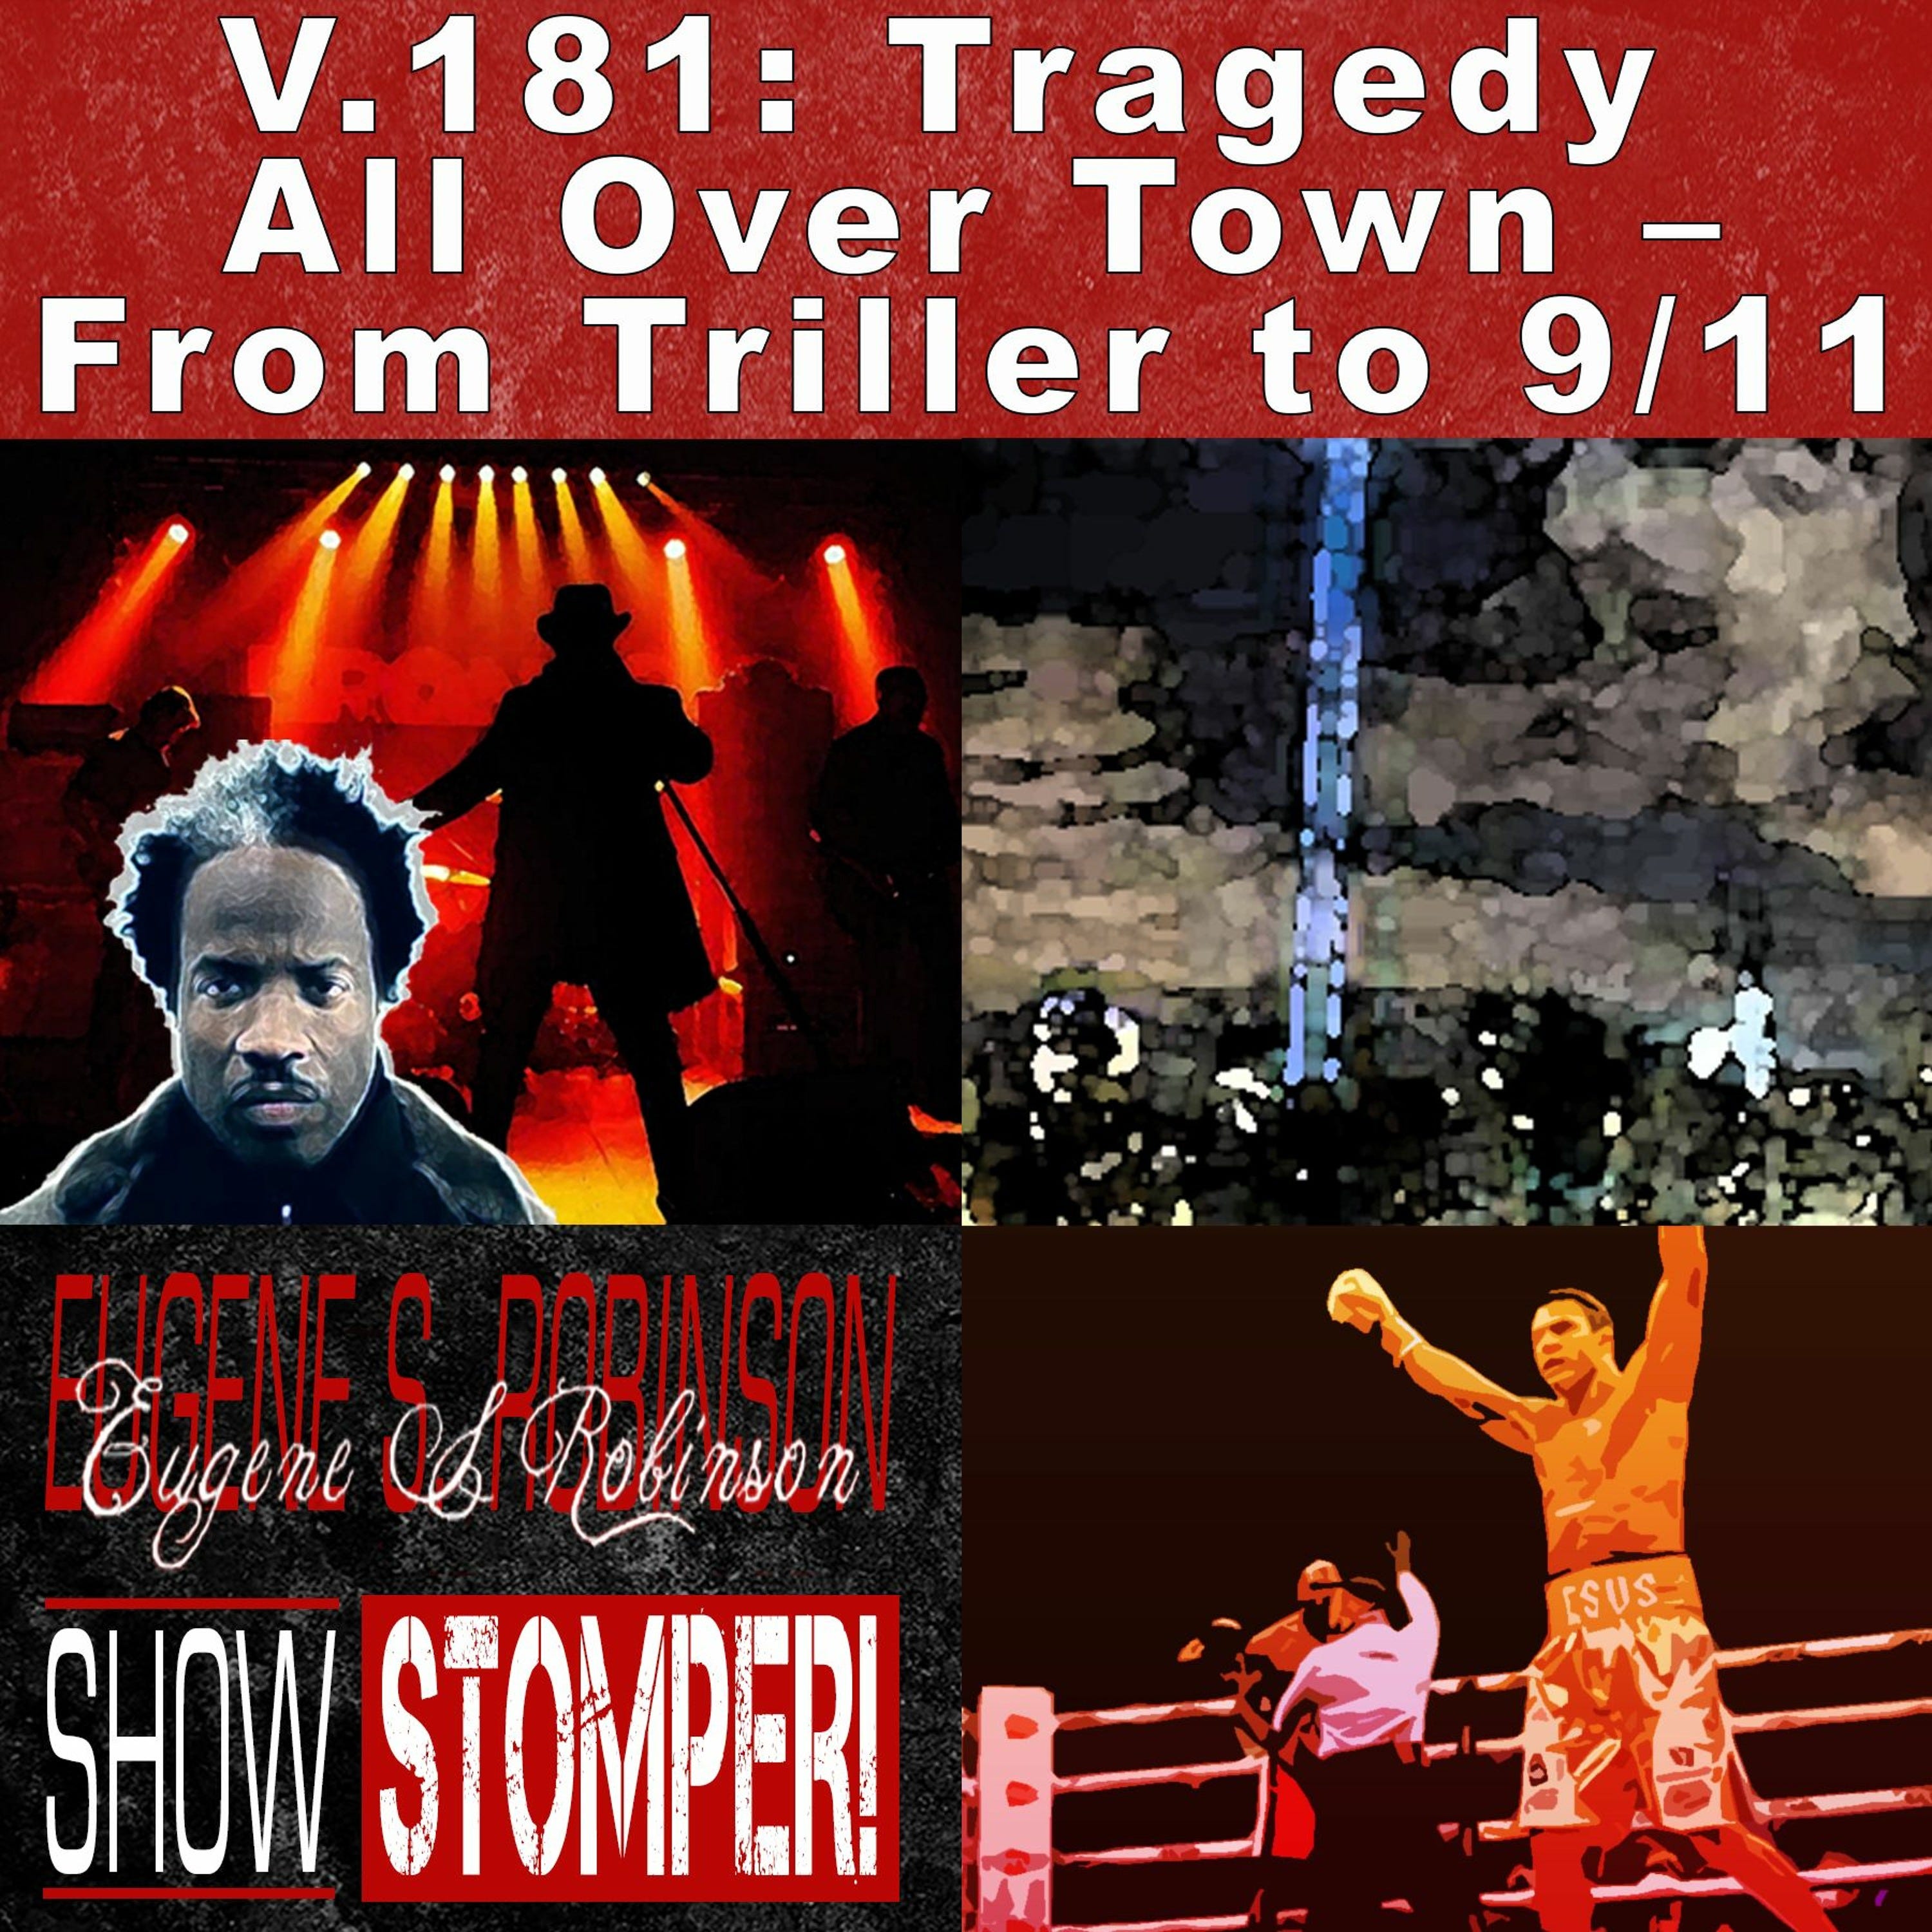 V.181 Tragedy All Over Town – From Triller To 911 On The Eugene S. Robinson Show Stomper!